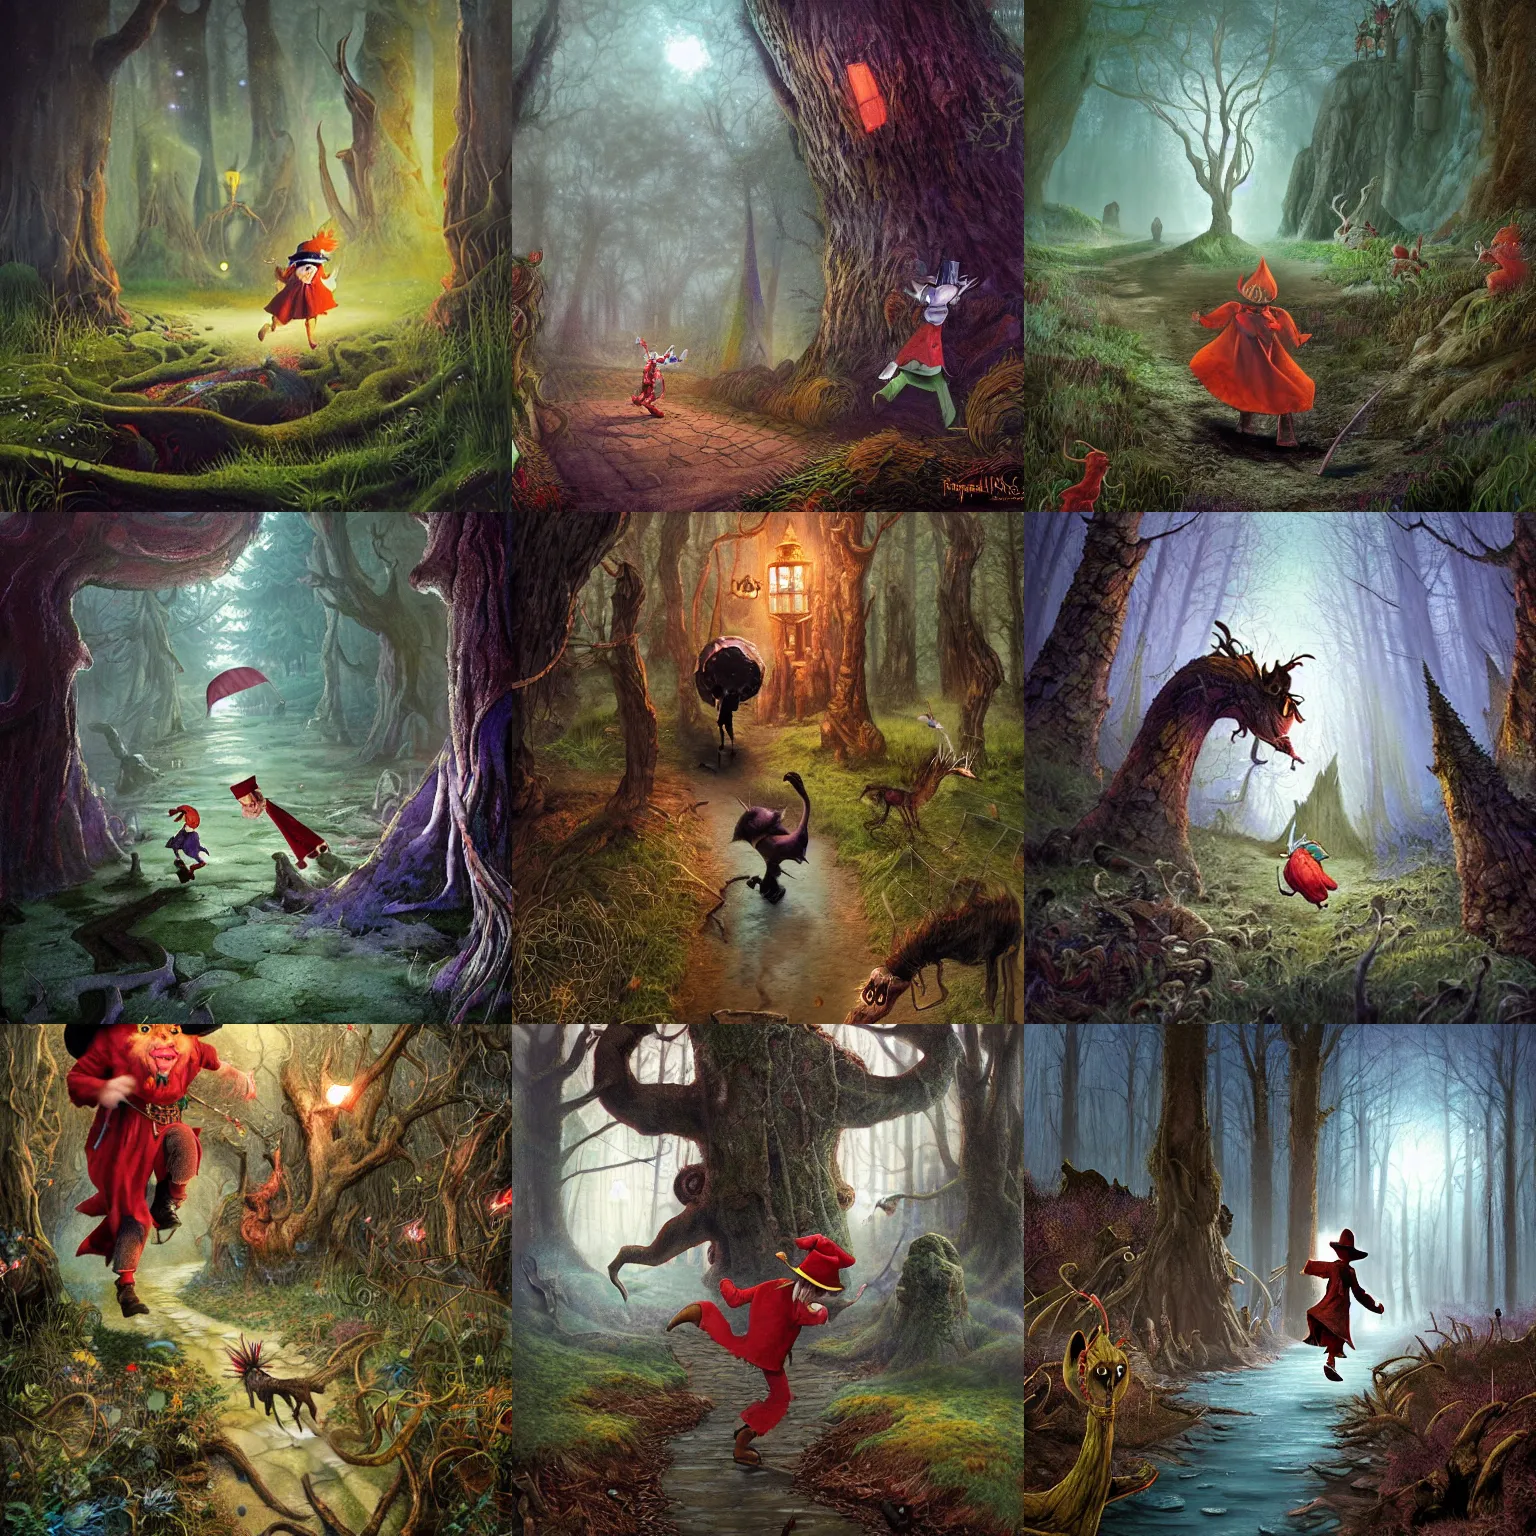 Little Red Riding Hood Meets The Big Bad Wolf Red Graphics Drinking - Ruby  Lane